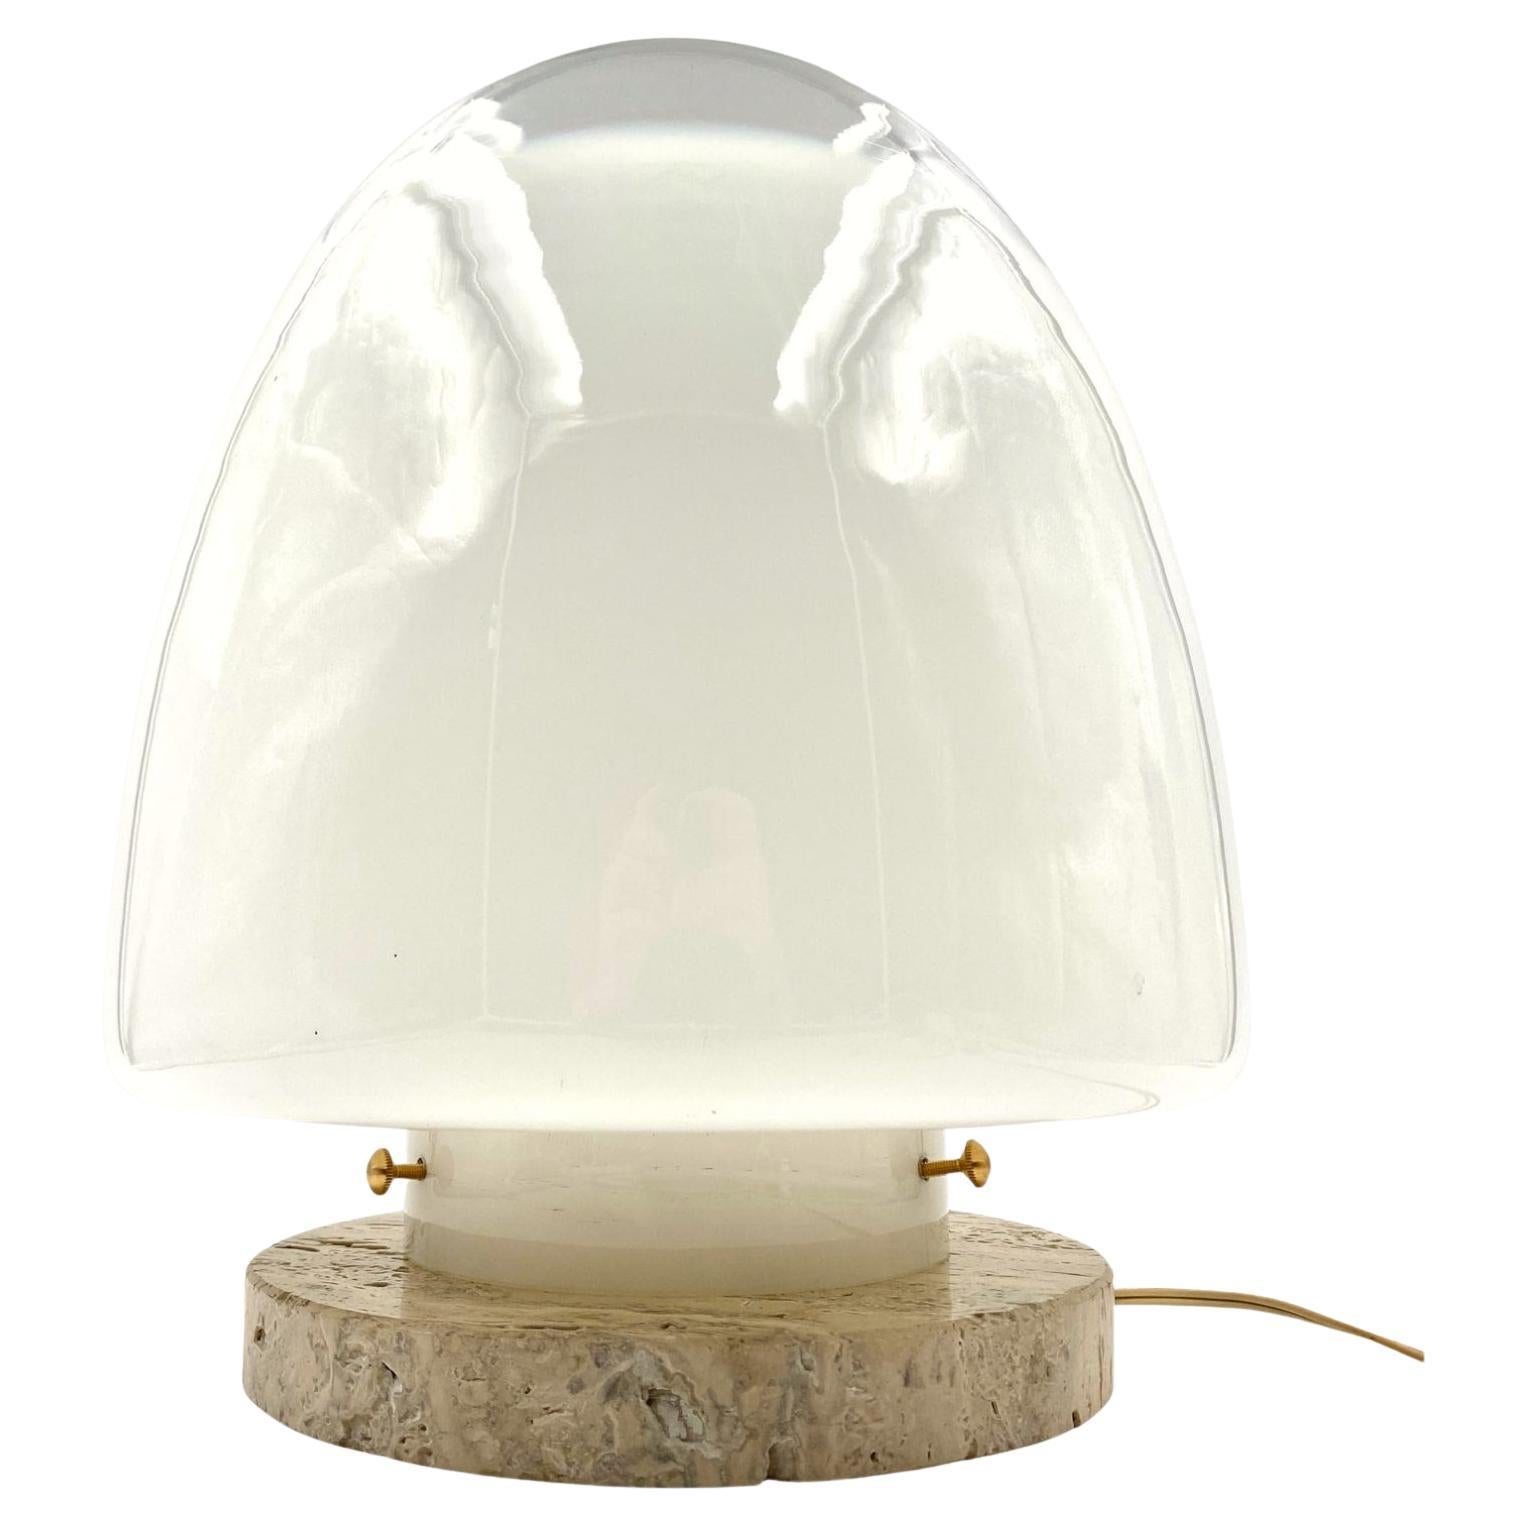 Giusto Toso Murano Art Glass and Travertine Table Lamp, Leucos, Italy, 1970s For Sale